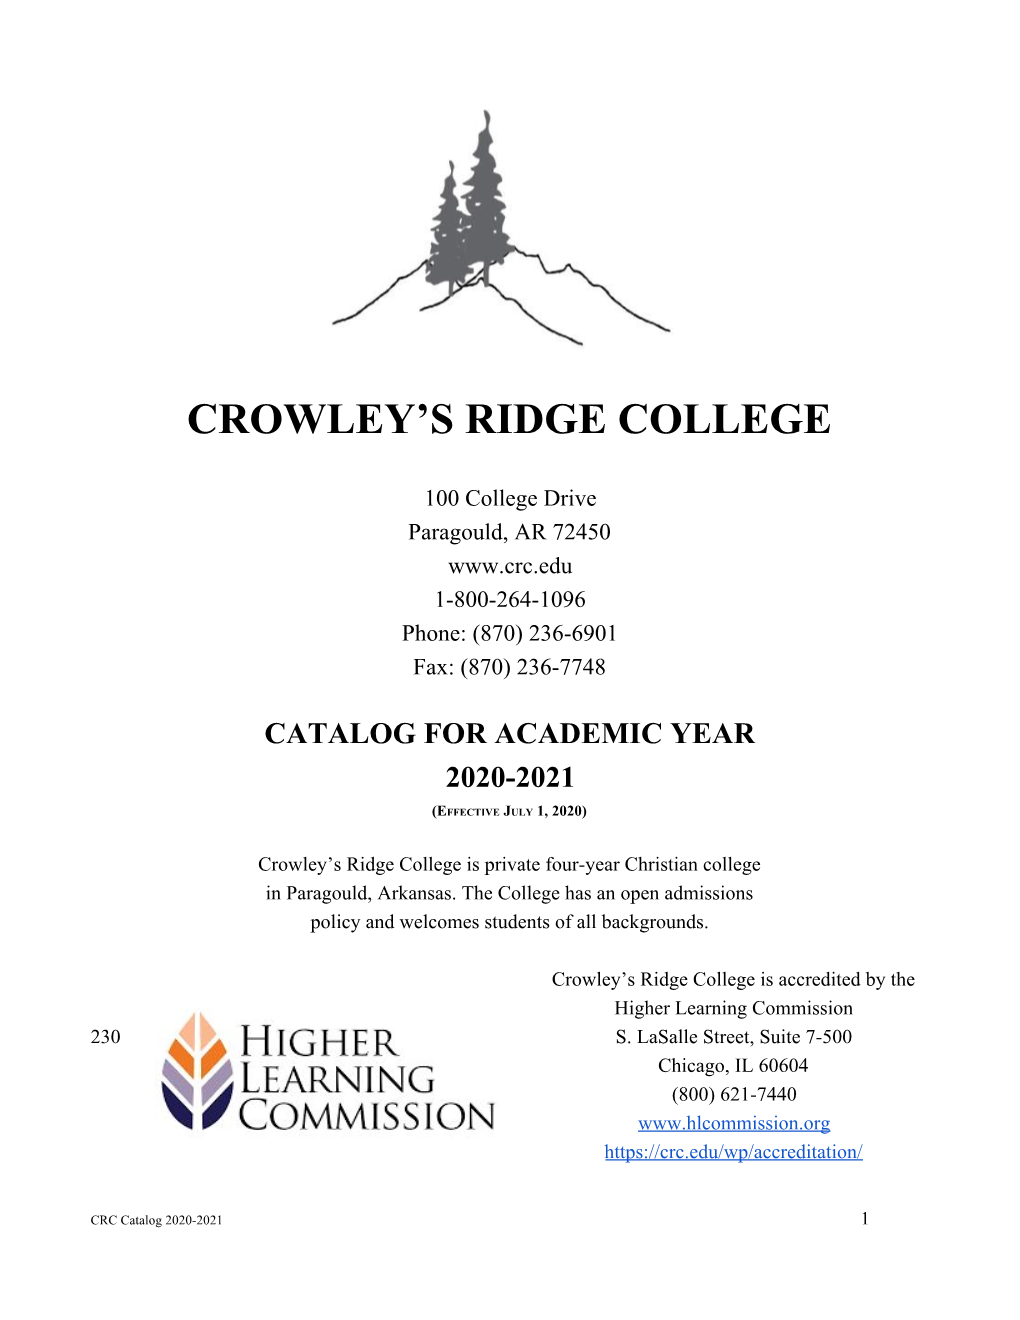 Crowley's Ridge College Offers Financial Assistance to Qualifying Students Through Federal, State, Private, and Institutionally-Funded Programs